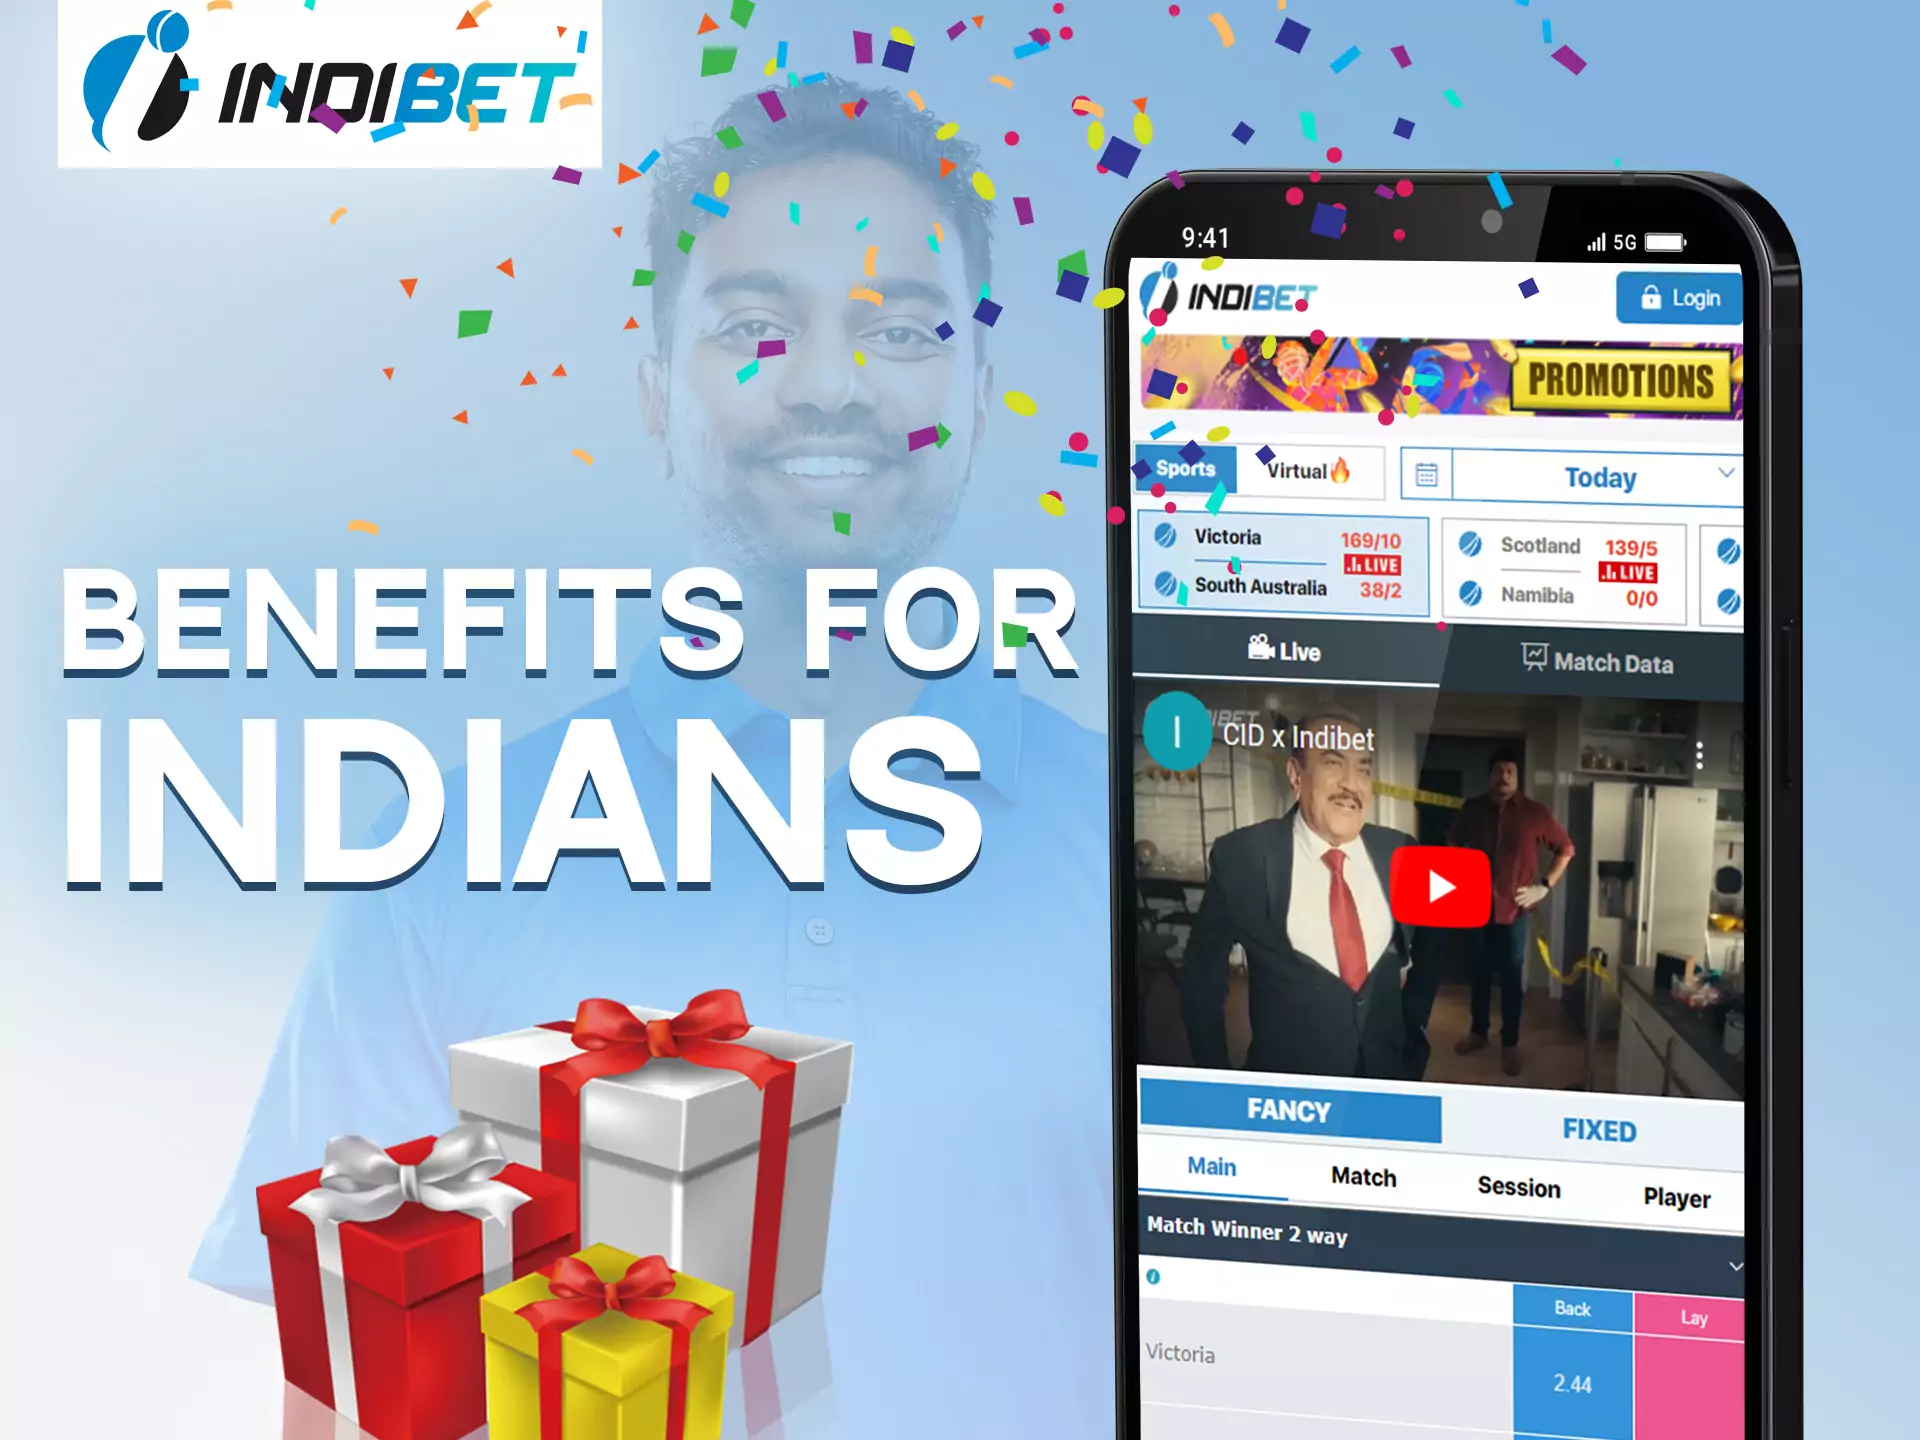 Get all of the possible bonuses at Indibet.